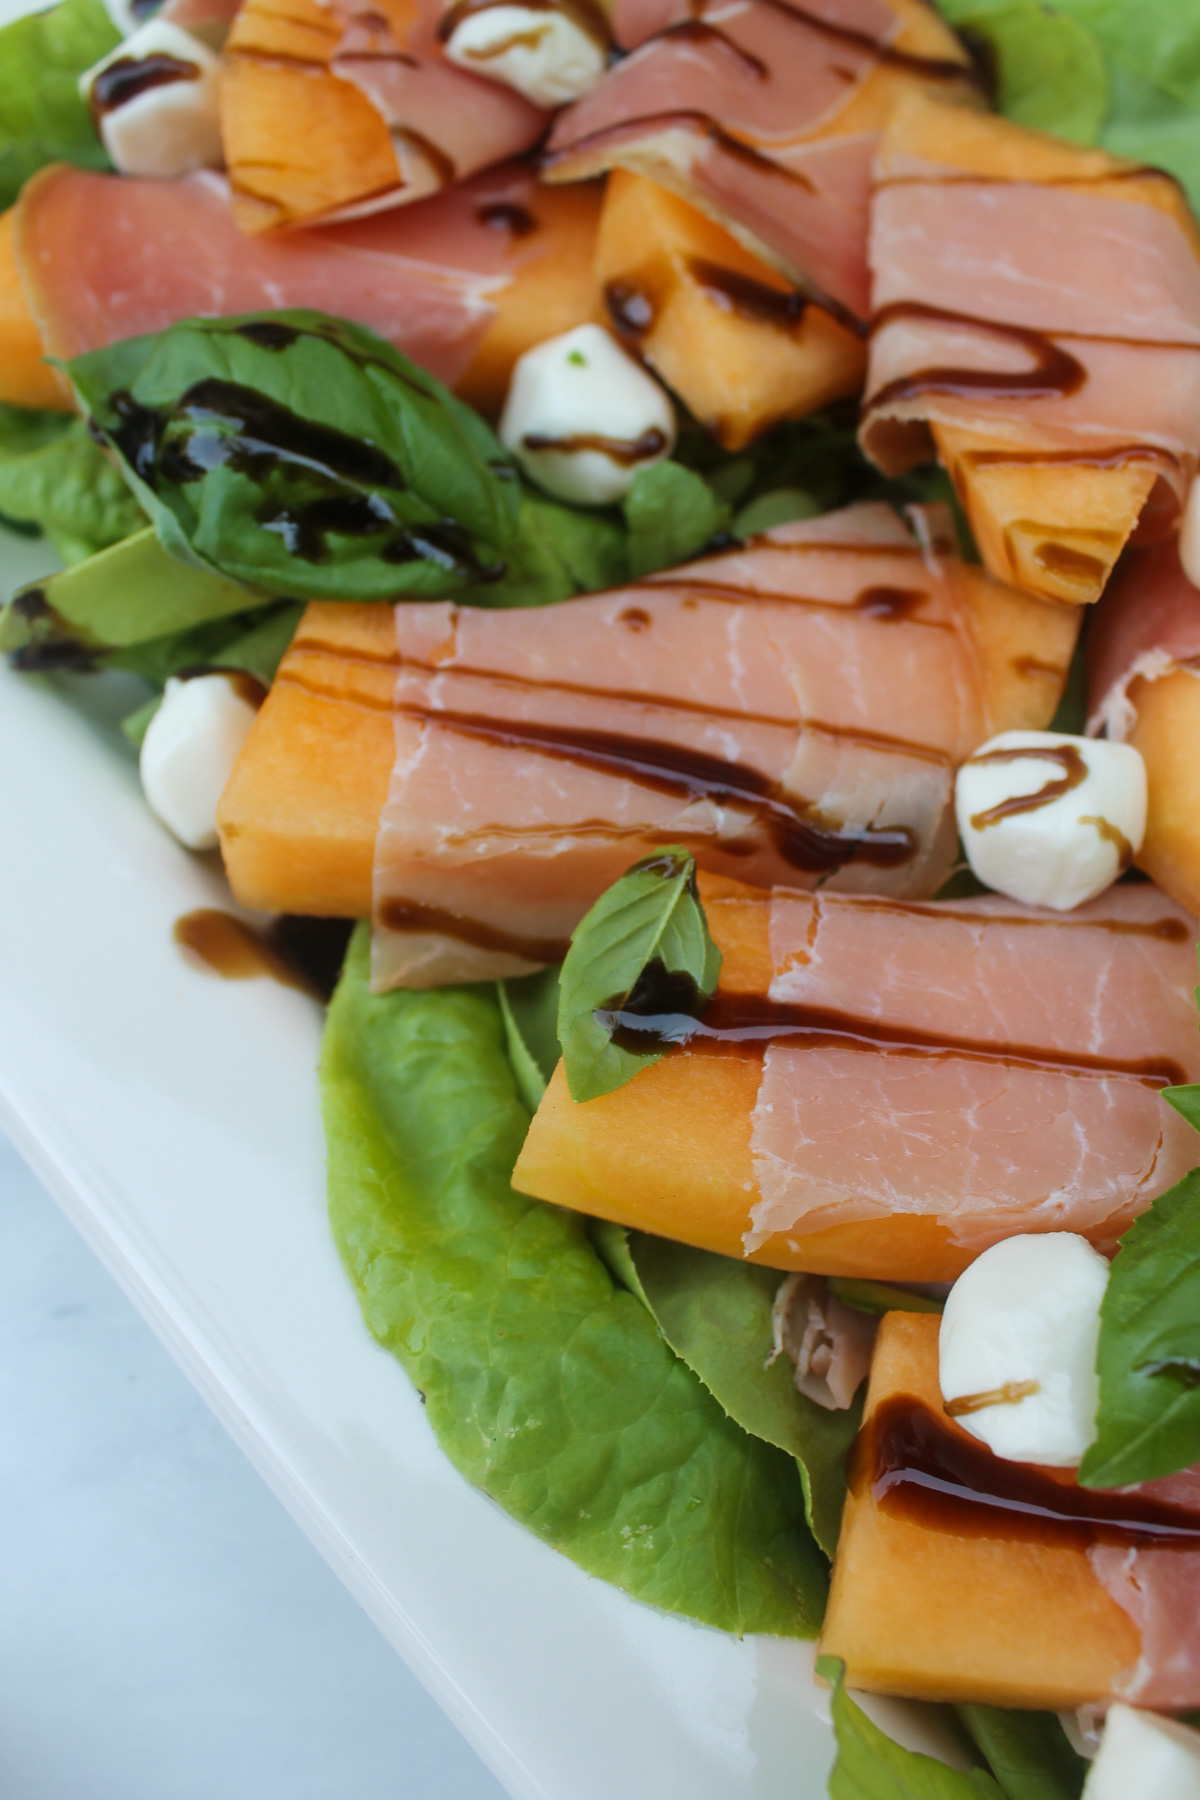 Melon and prosciutto salad with drizzled balsamic glaze.